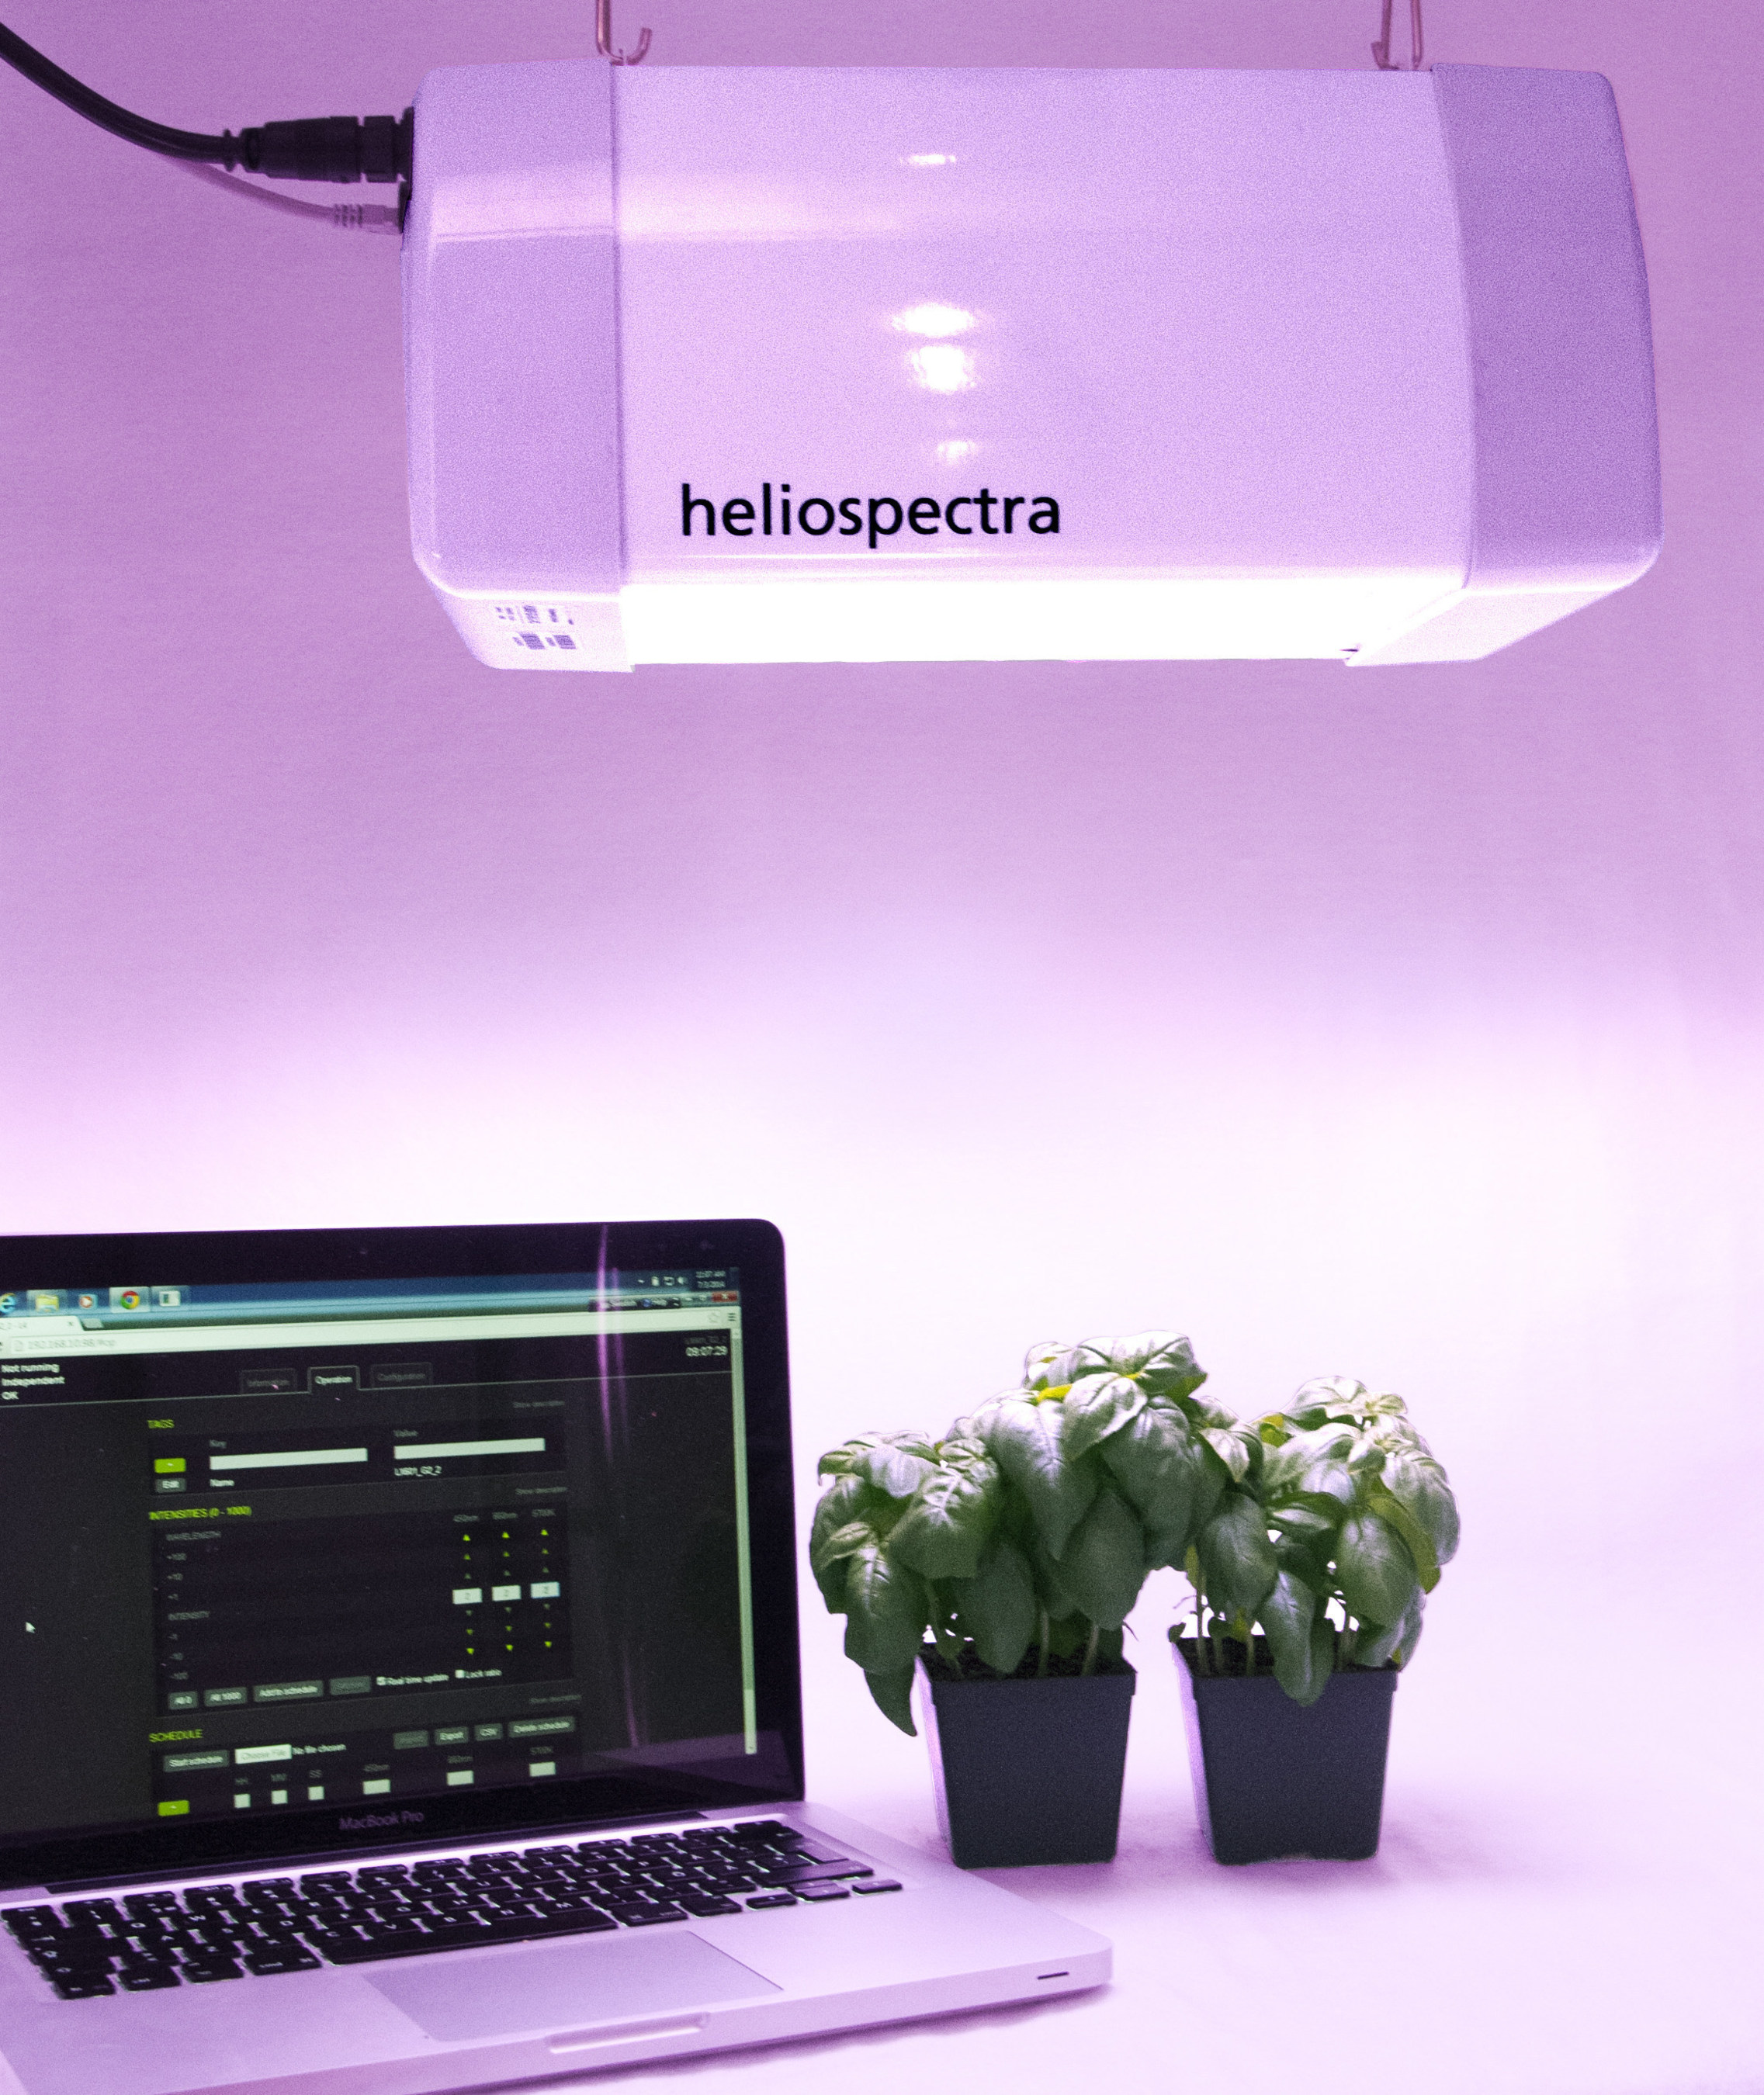 Heliospectra LED grow light system controlled via web interface optimizing plant growth to save up to 50% energy and growing better tasting, longer lasting plants